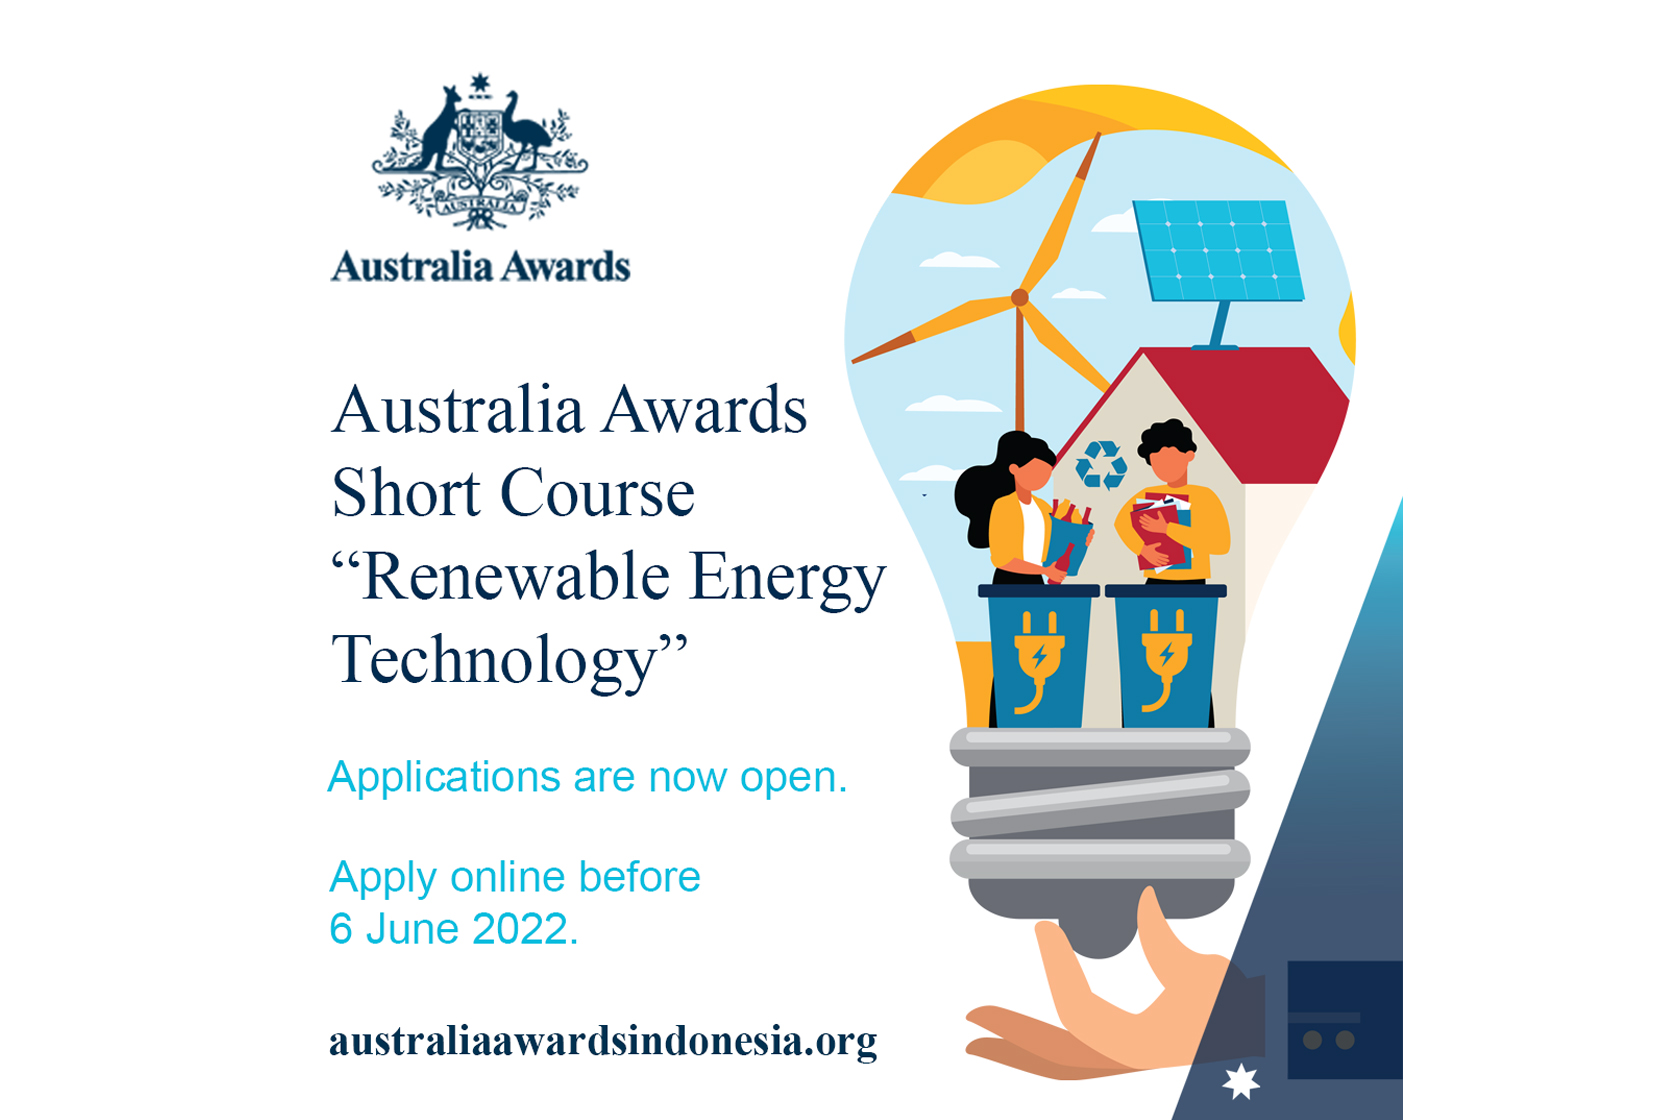 Applications Open for the Australia Awards Short Course on Renewable Energy Technologies